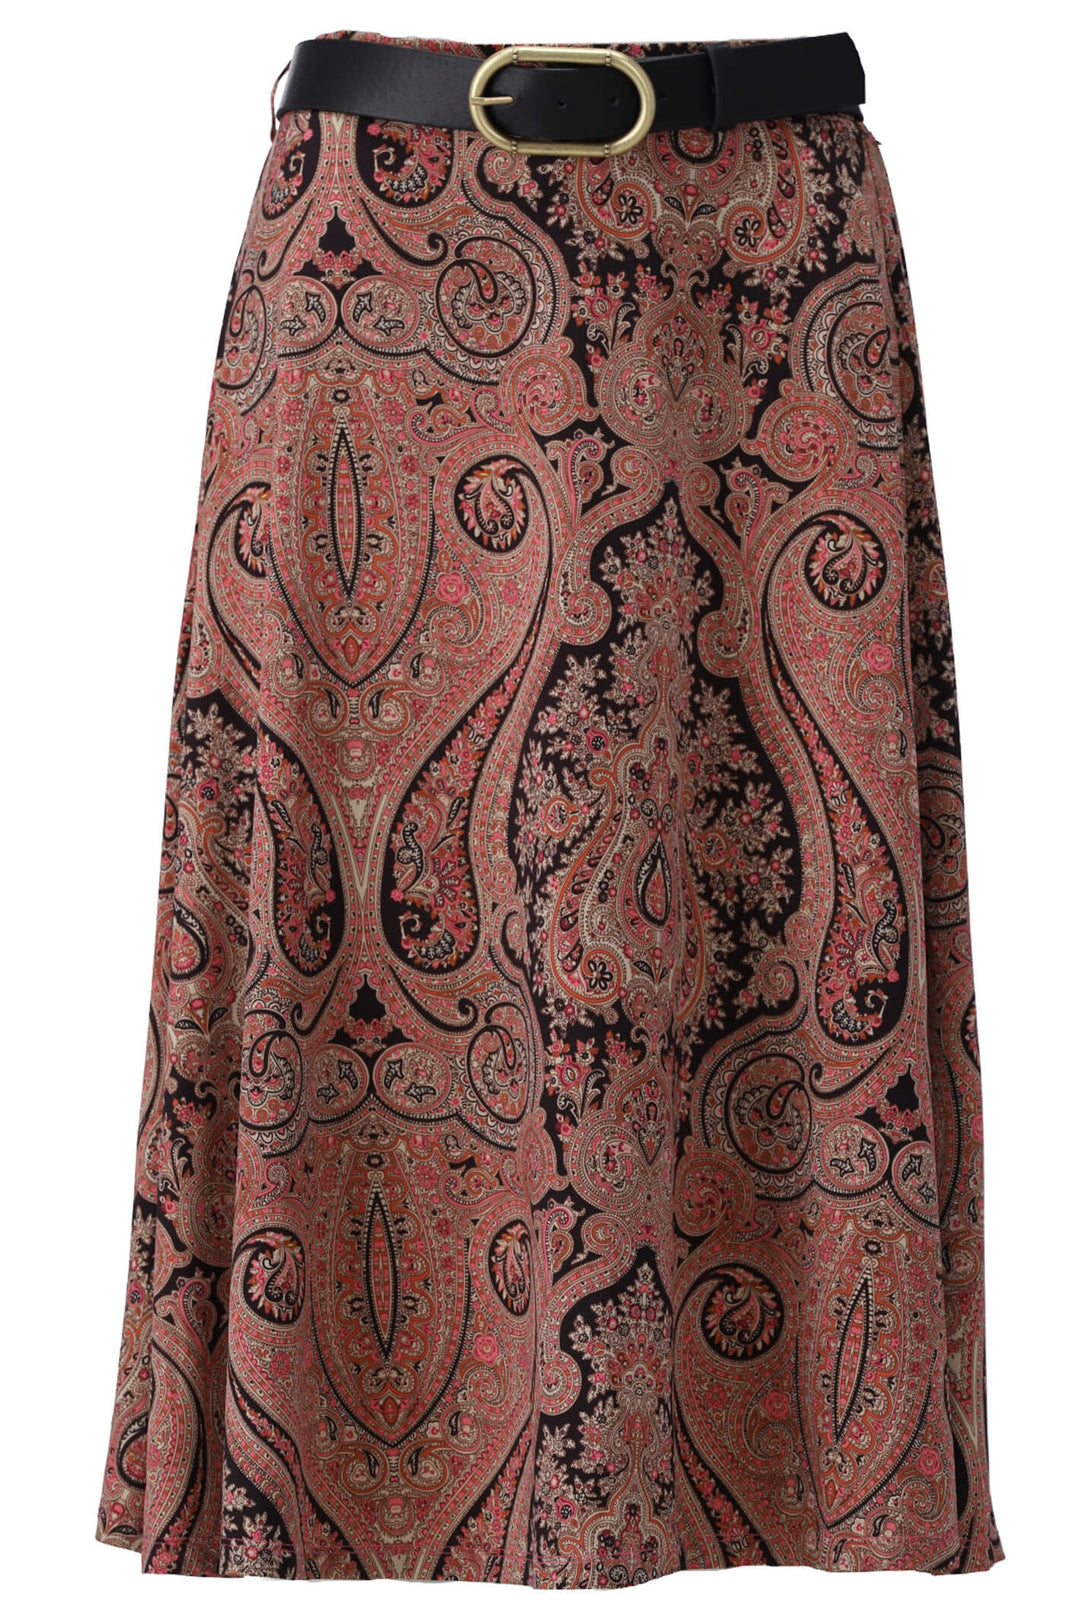 K Design V331 Black Coral Paisley Print Skirt With Belt - Experience Boutique